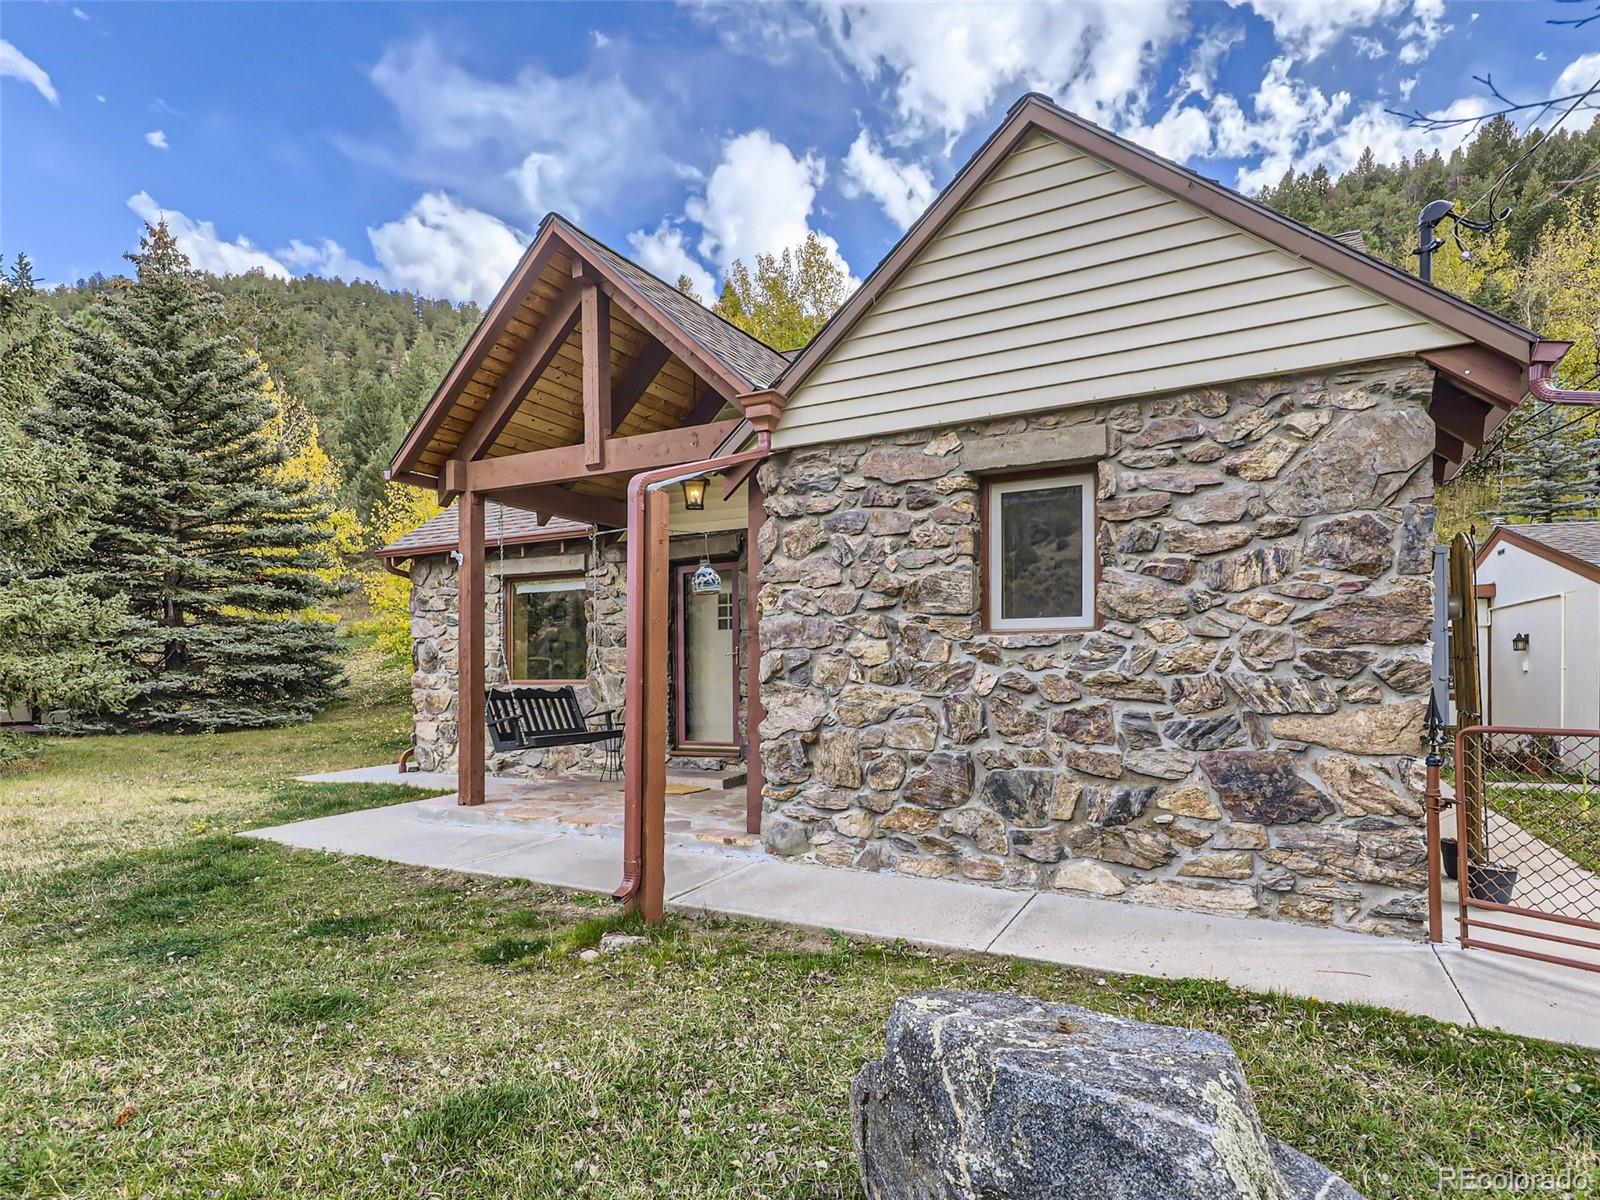 167  buckskin trail, Idaho Springs sold home. Closed on 2024-02-16 for $837,500.